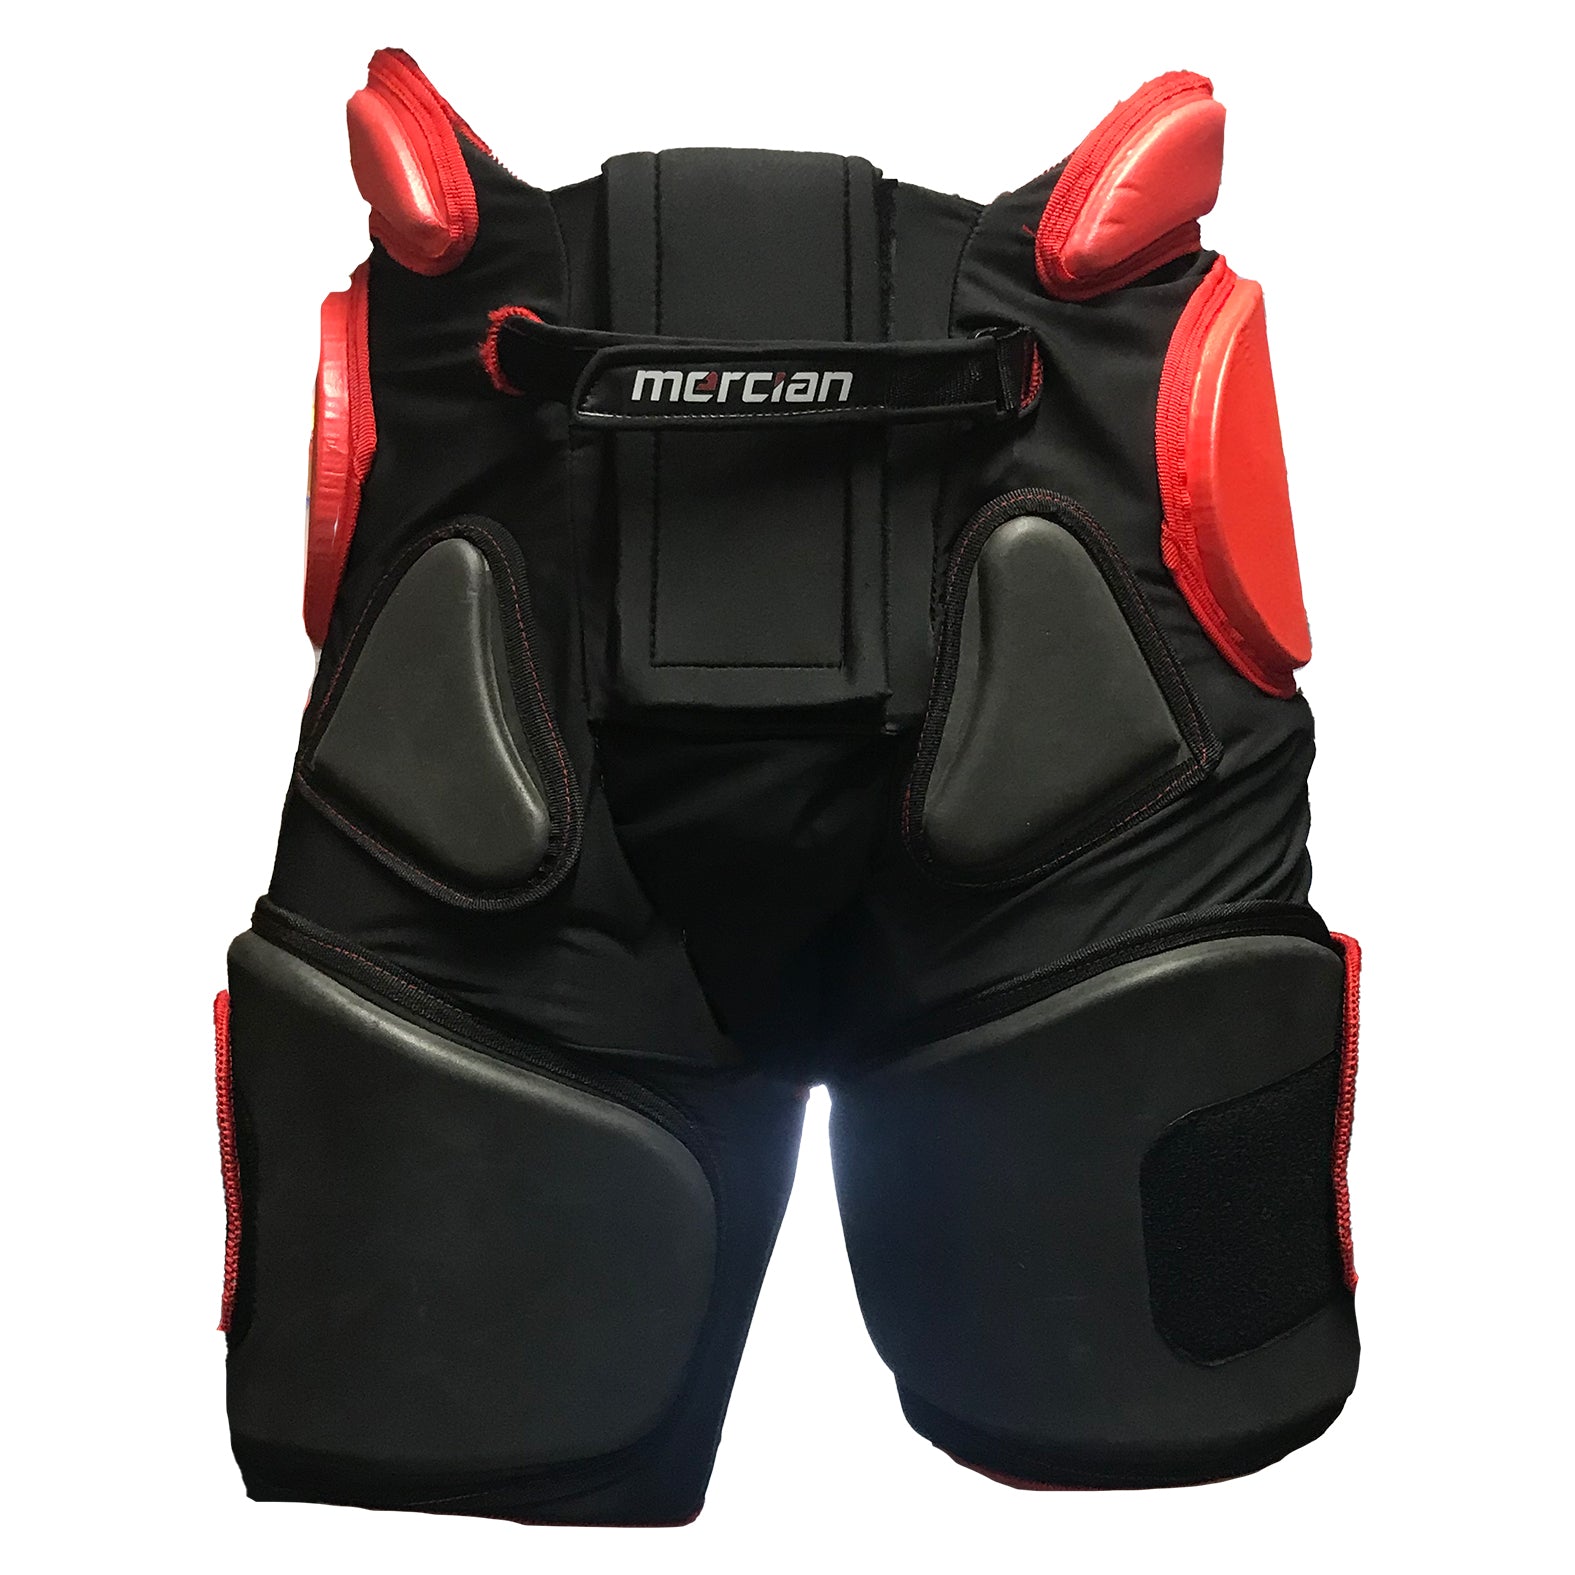 Mercian Evolution 1 Girdle Black/Red with overshorts